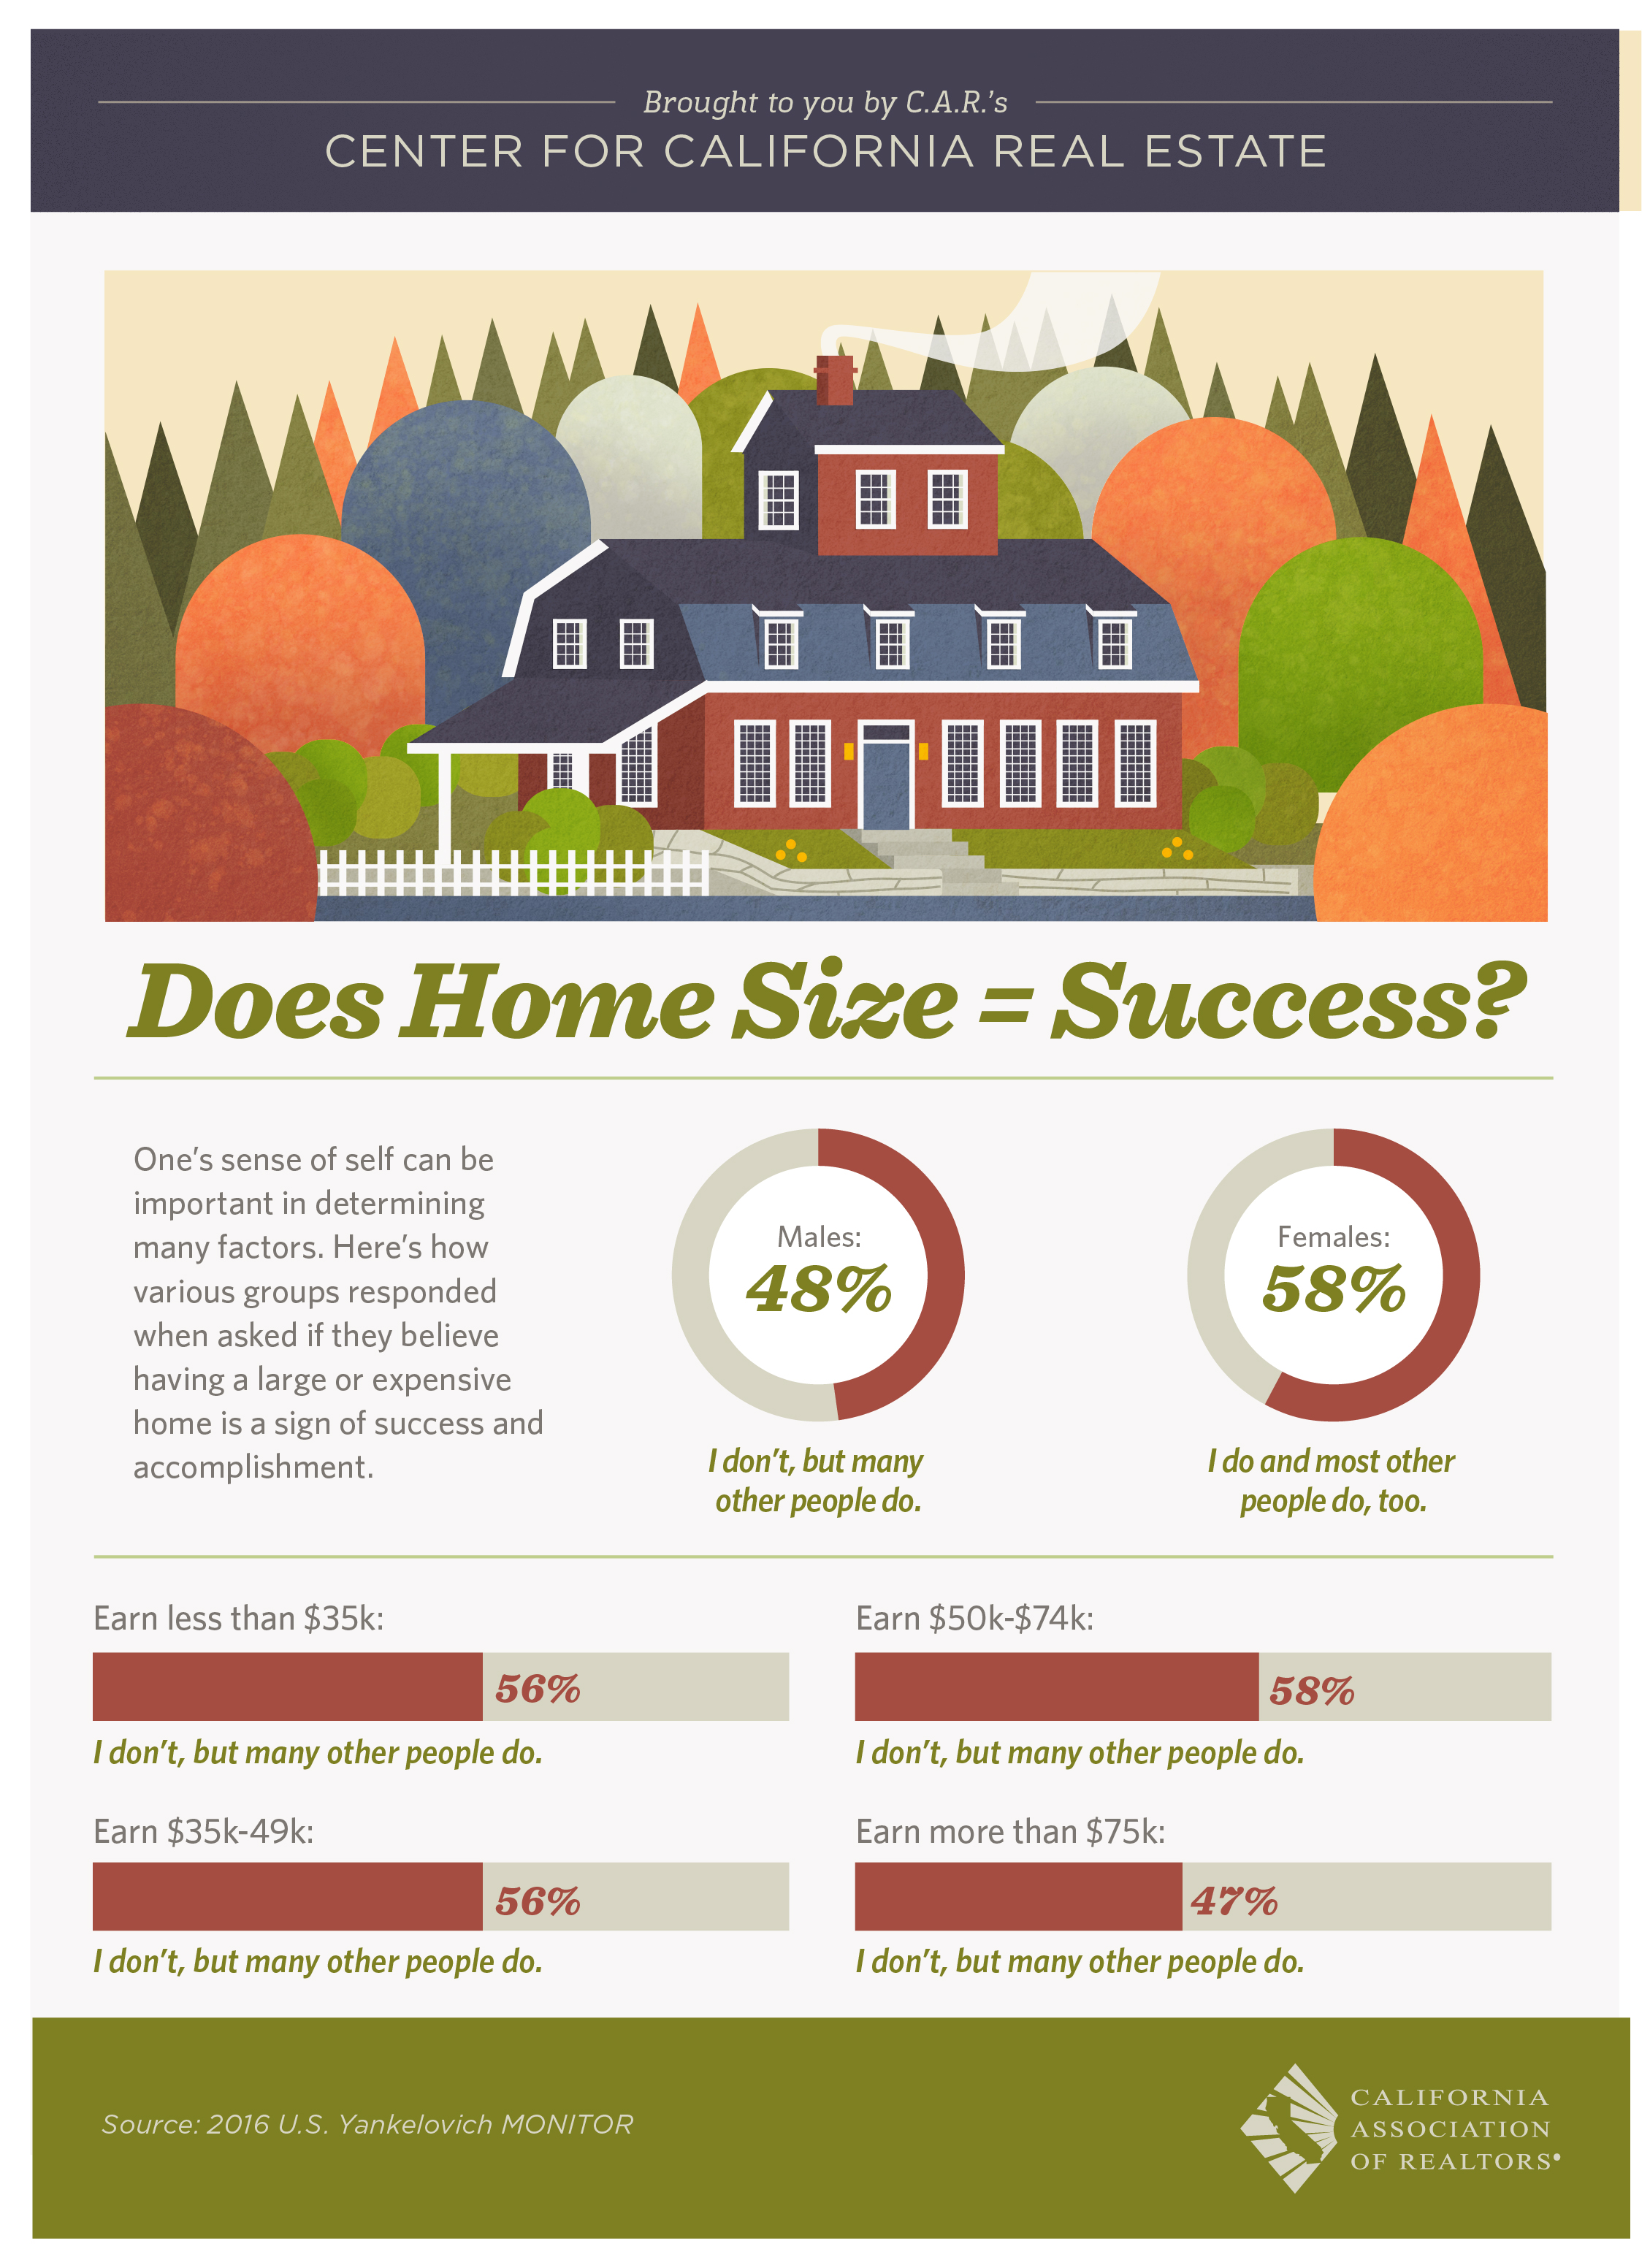 One's sense of self can be important in determining many factors. Here's how various groups responded when asked if they believe having a large or expensive home is a sign of success.